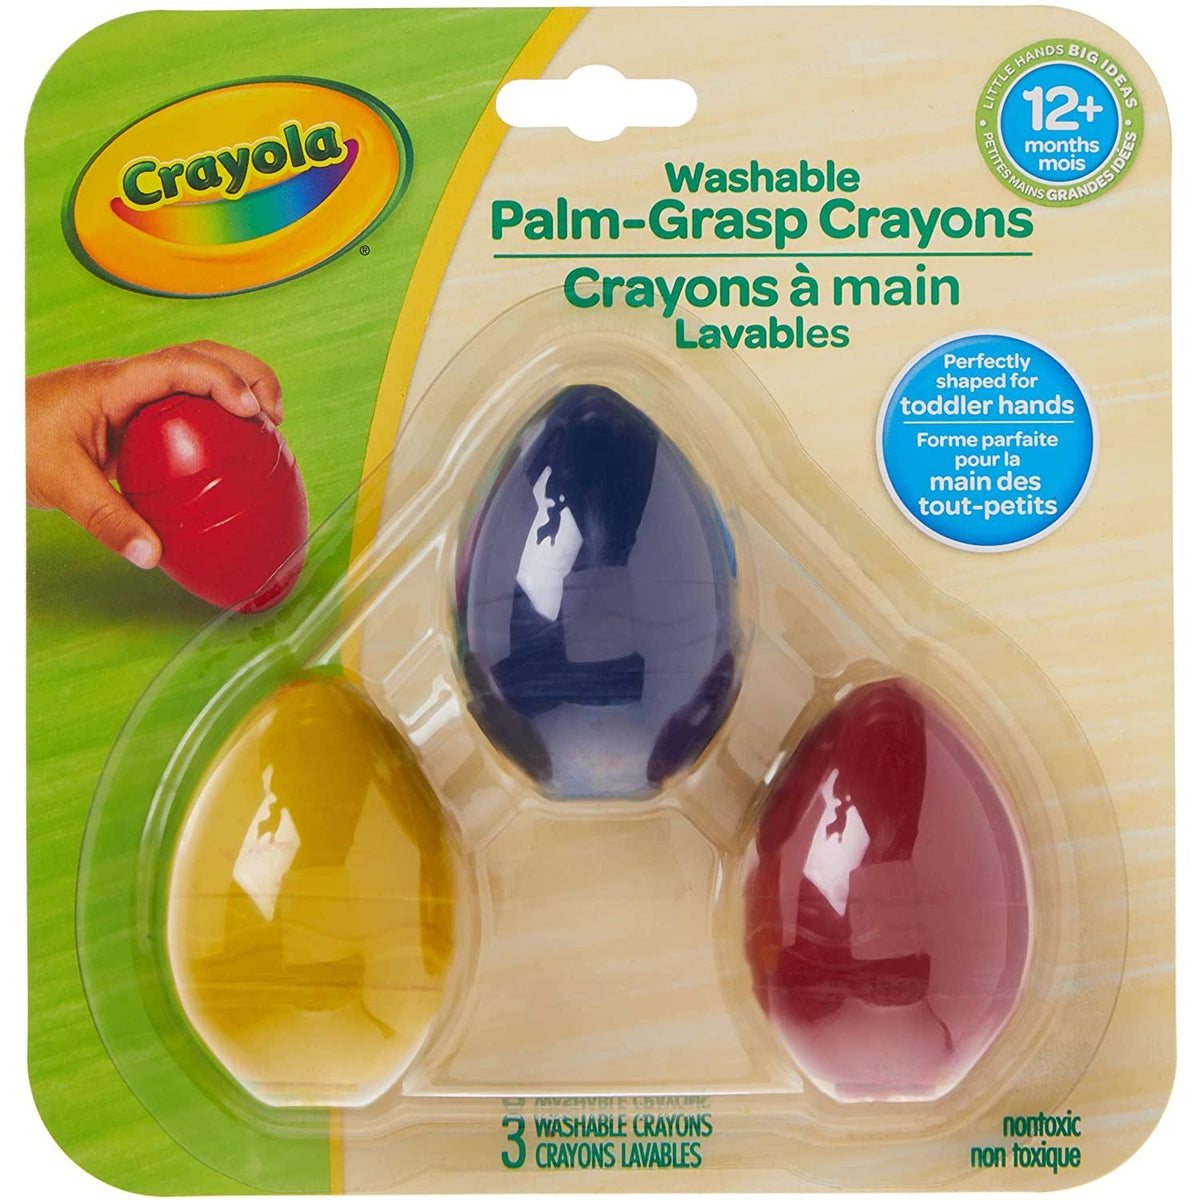 Crayola Washable Palm Grasp Crayons For Toddlers